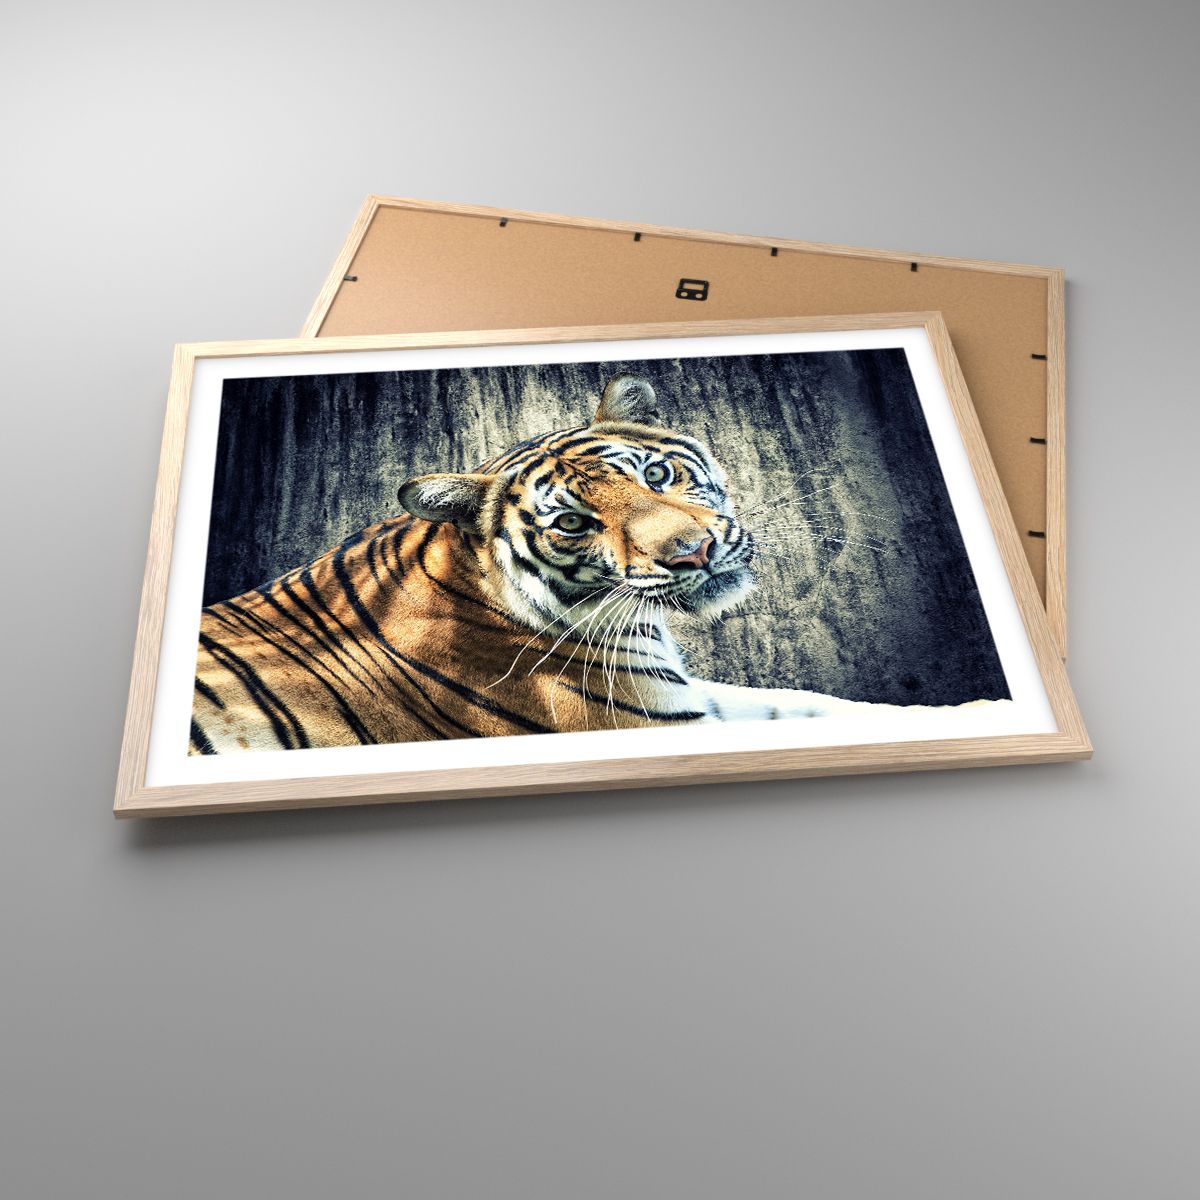 Poster Tiere, Poster Tiger, Poster Afrika, Poster Wildes Tier, Poster Indien